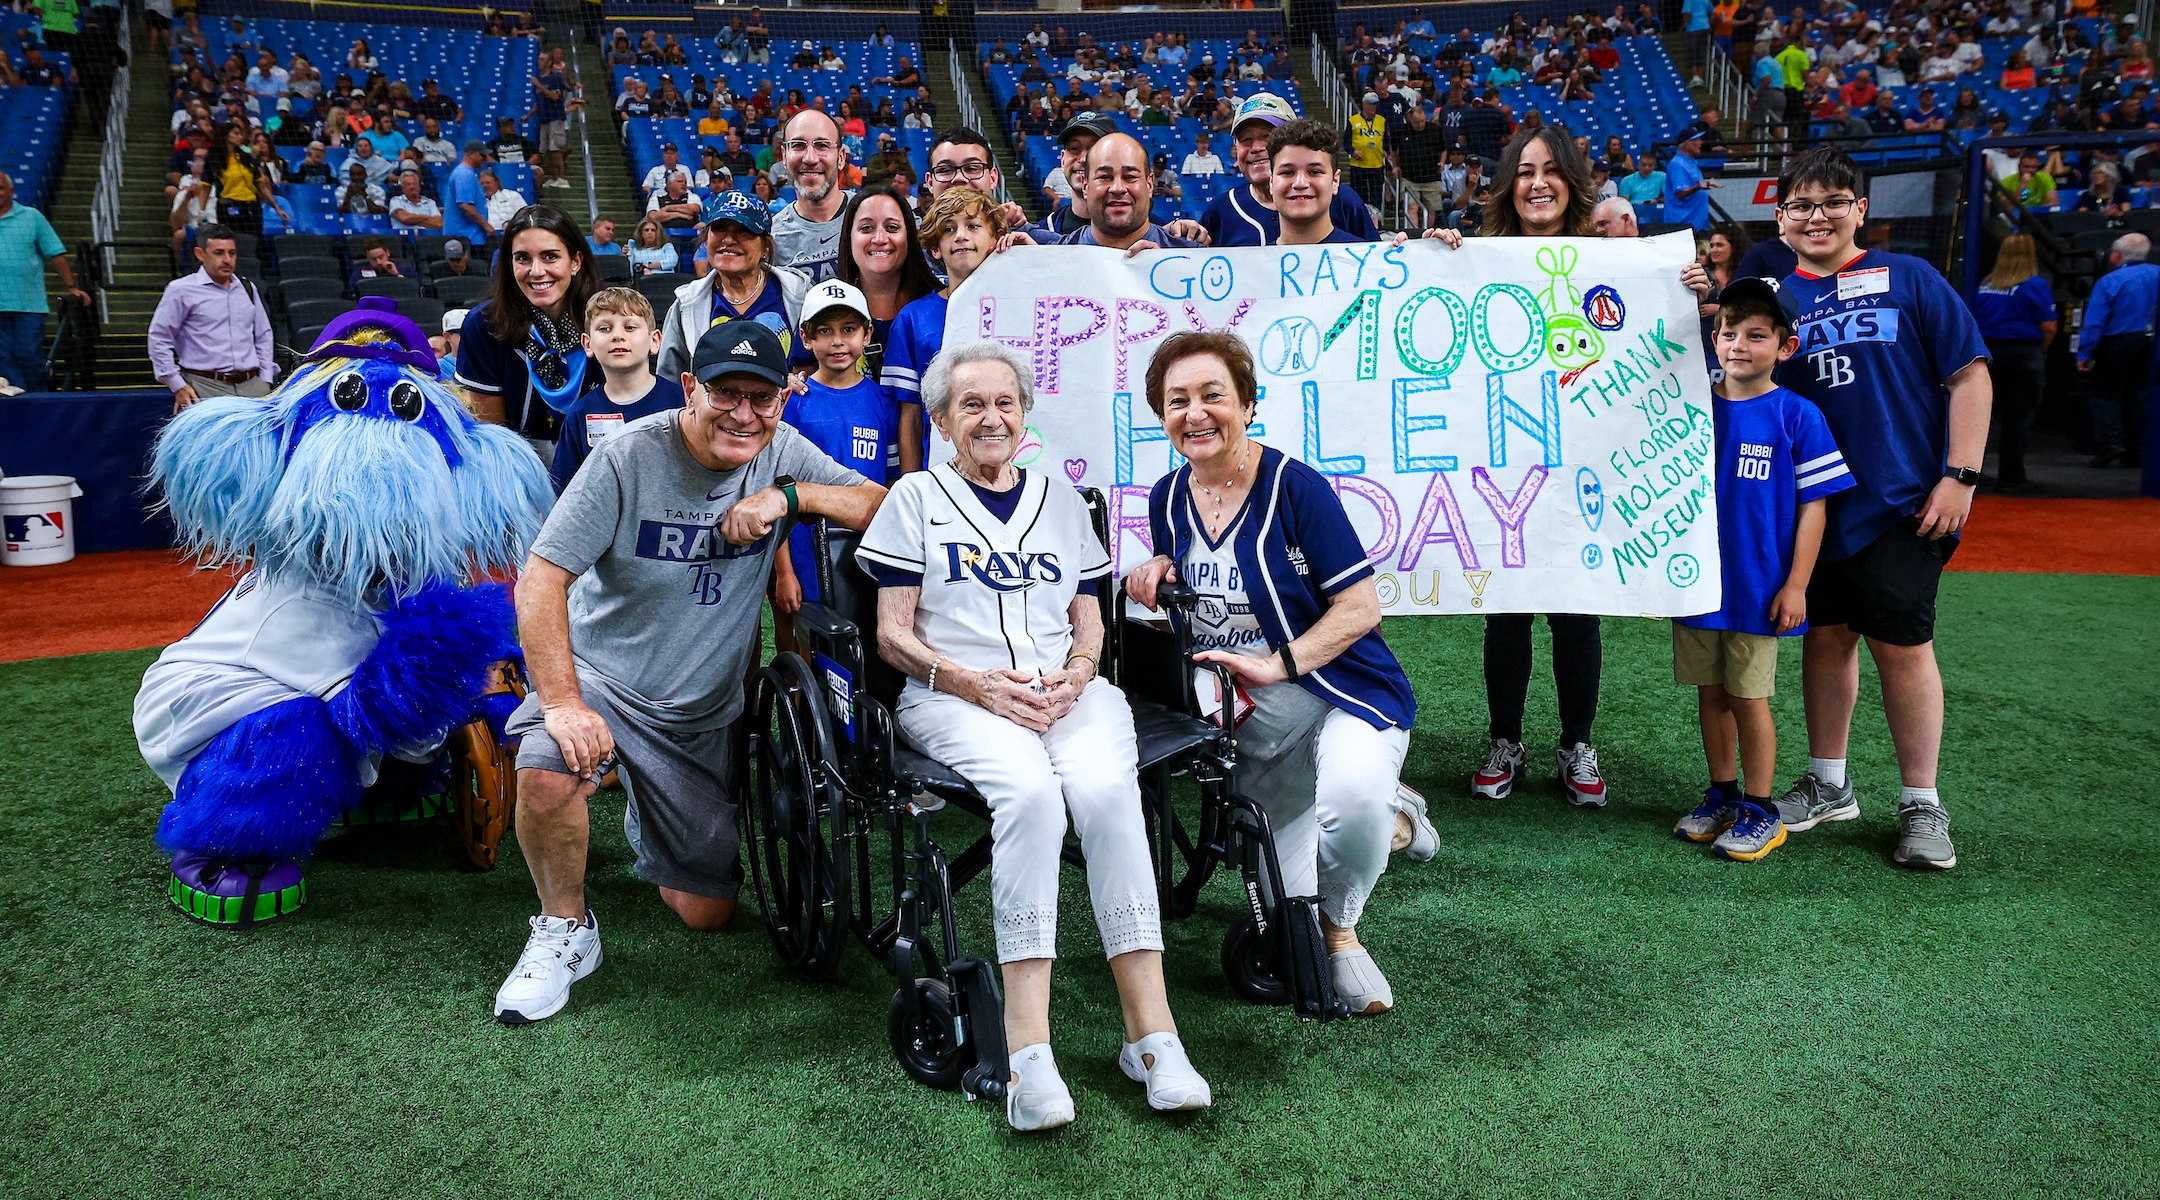 The Jewish Sport Report: This Holocaust survivor threw out the first pitch on her 100th birthday